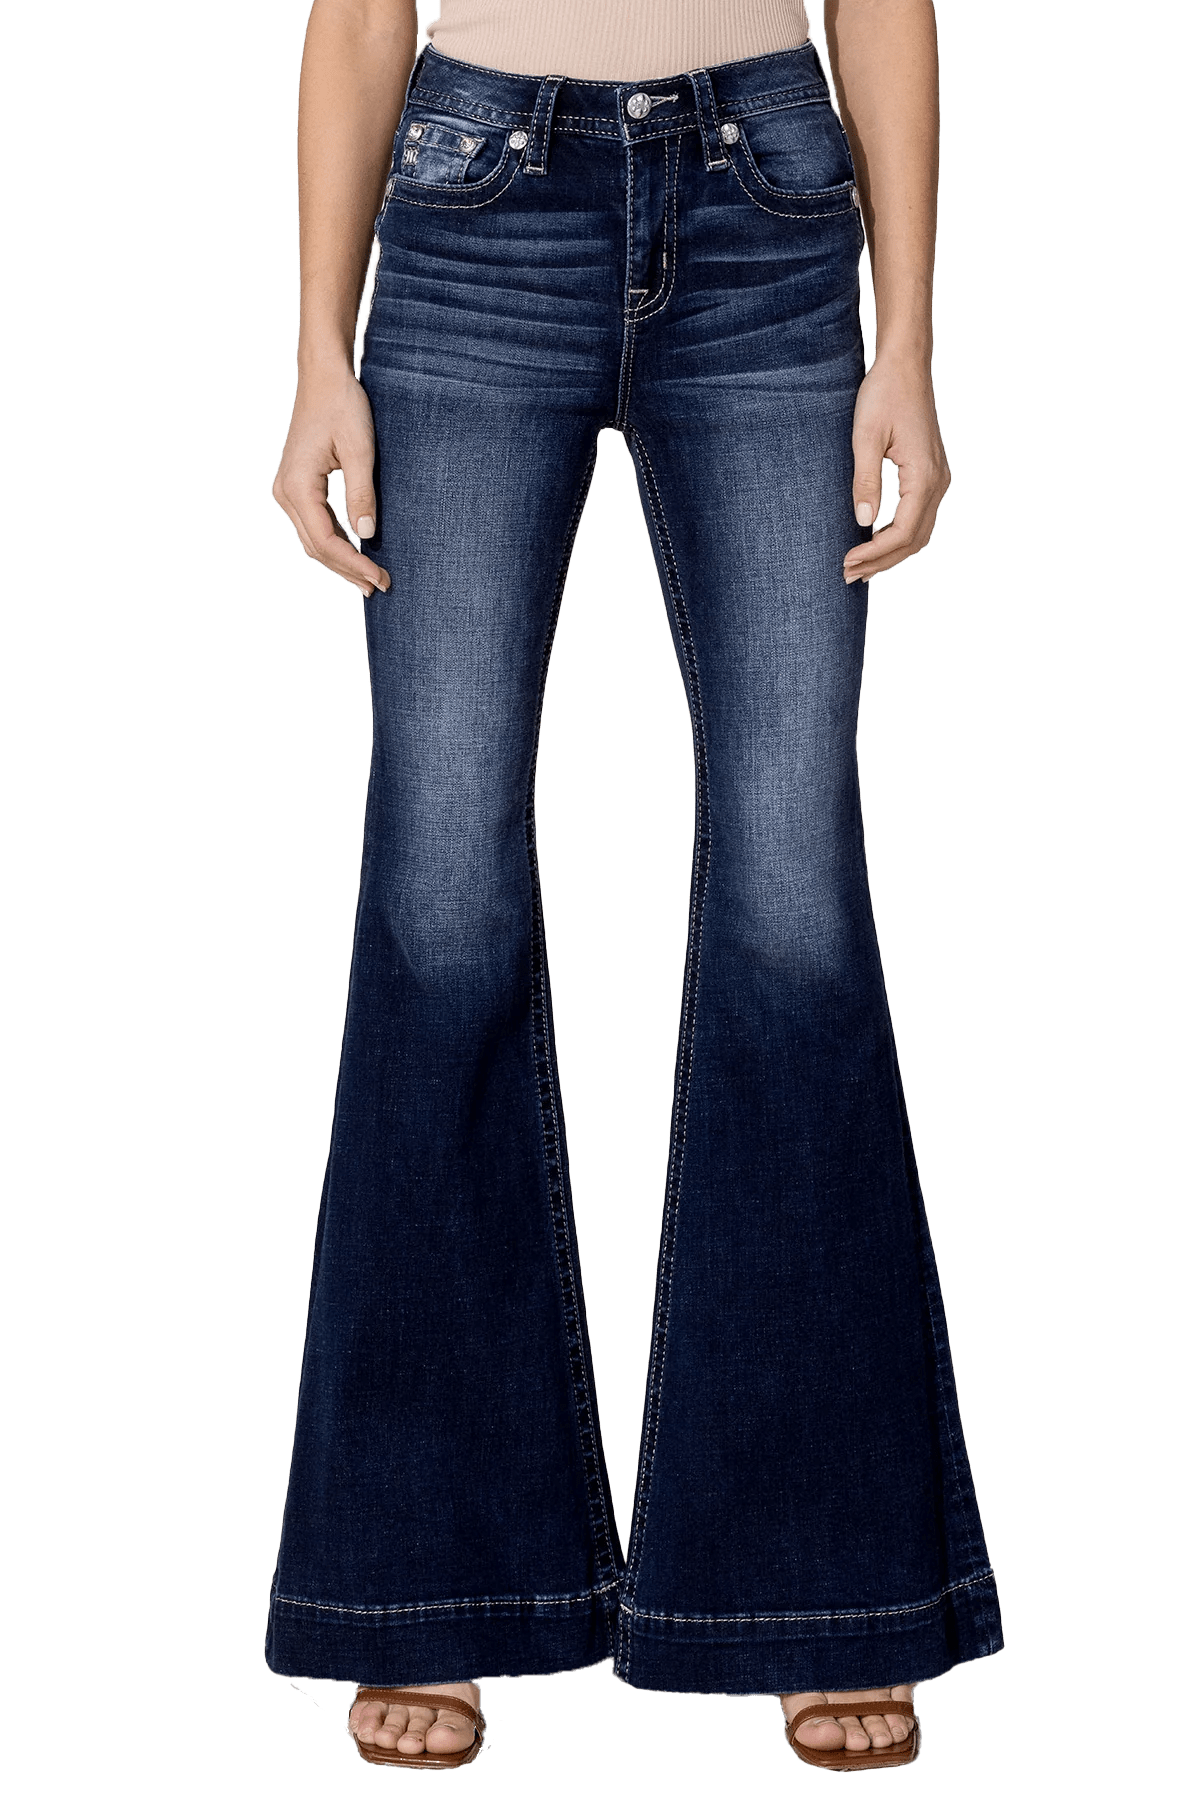 Miss Me Women's High Rise Flare Jeans